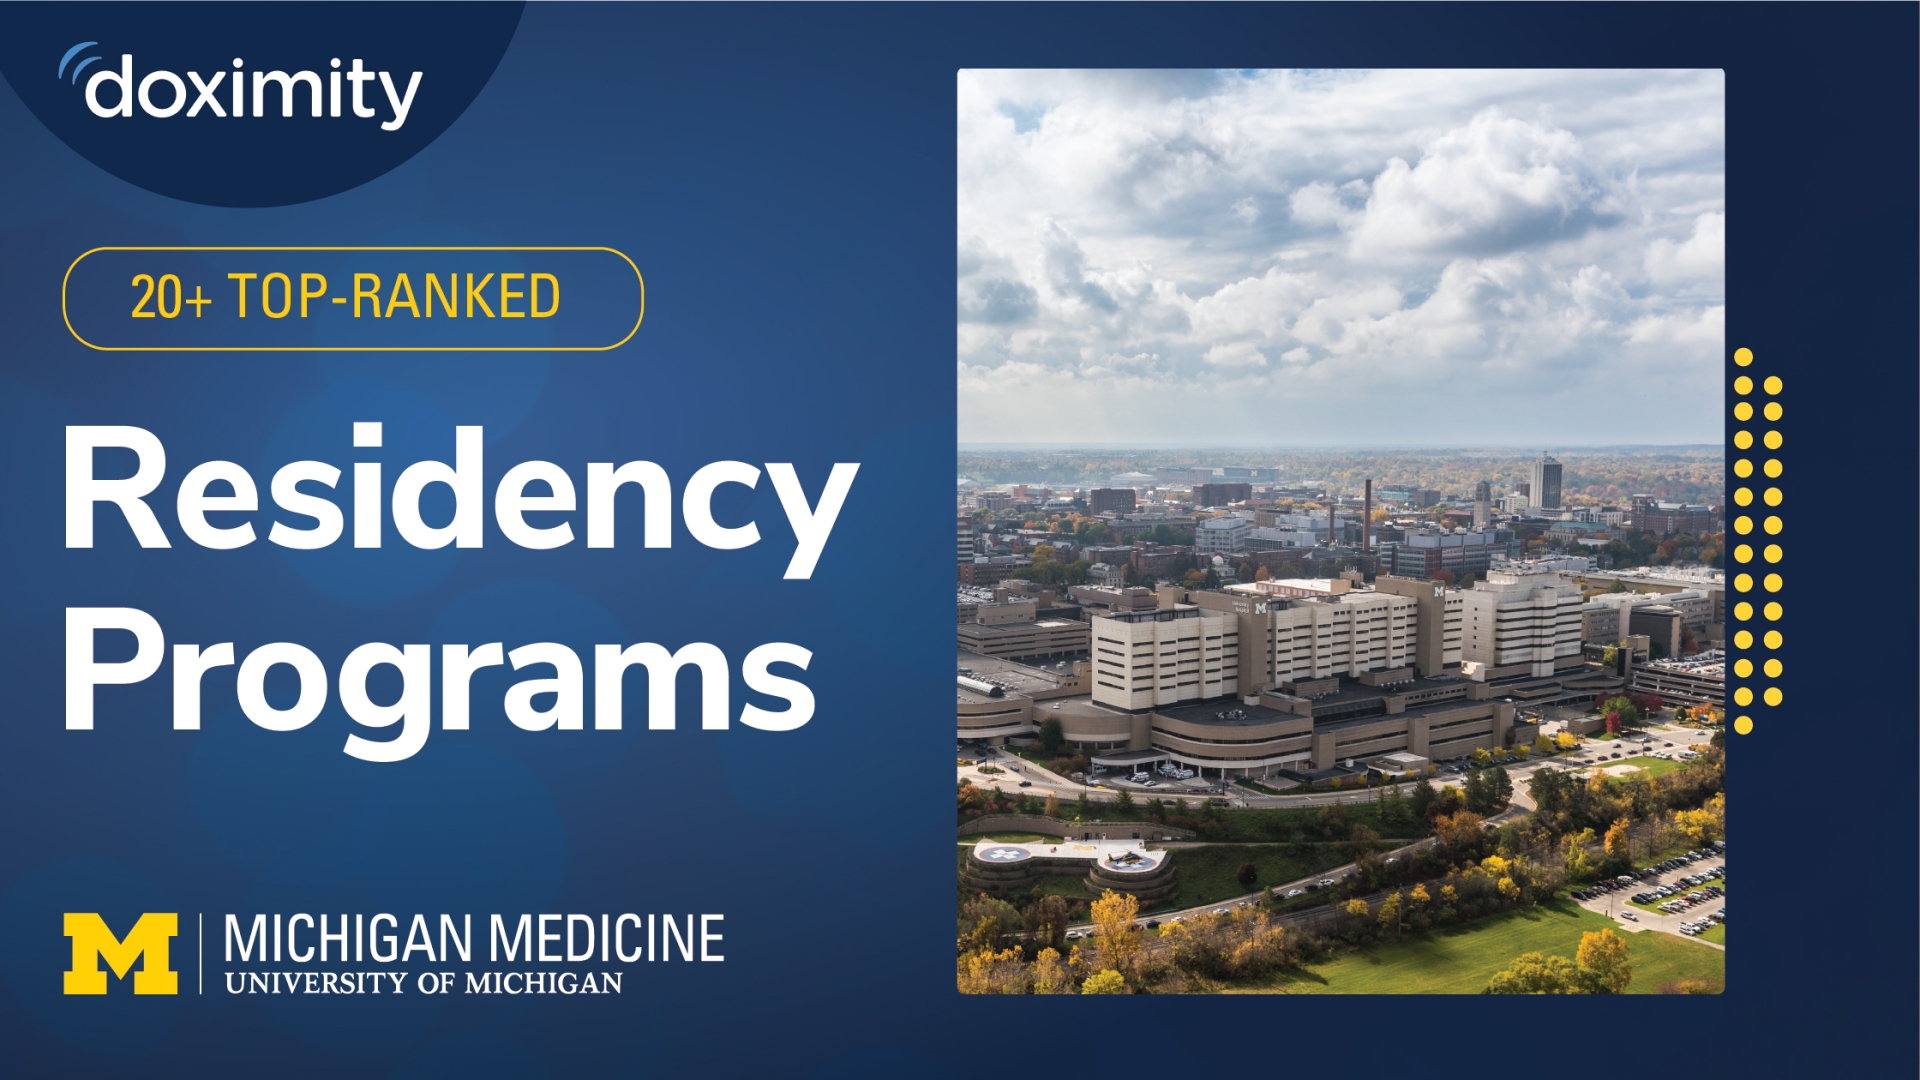 Text reading "20+ Top-Ranked Residency Programs" next to an image of Michigan Medicine buildings